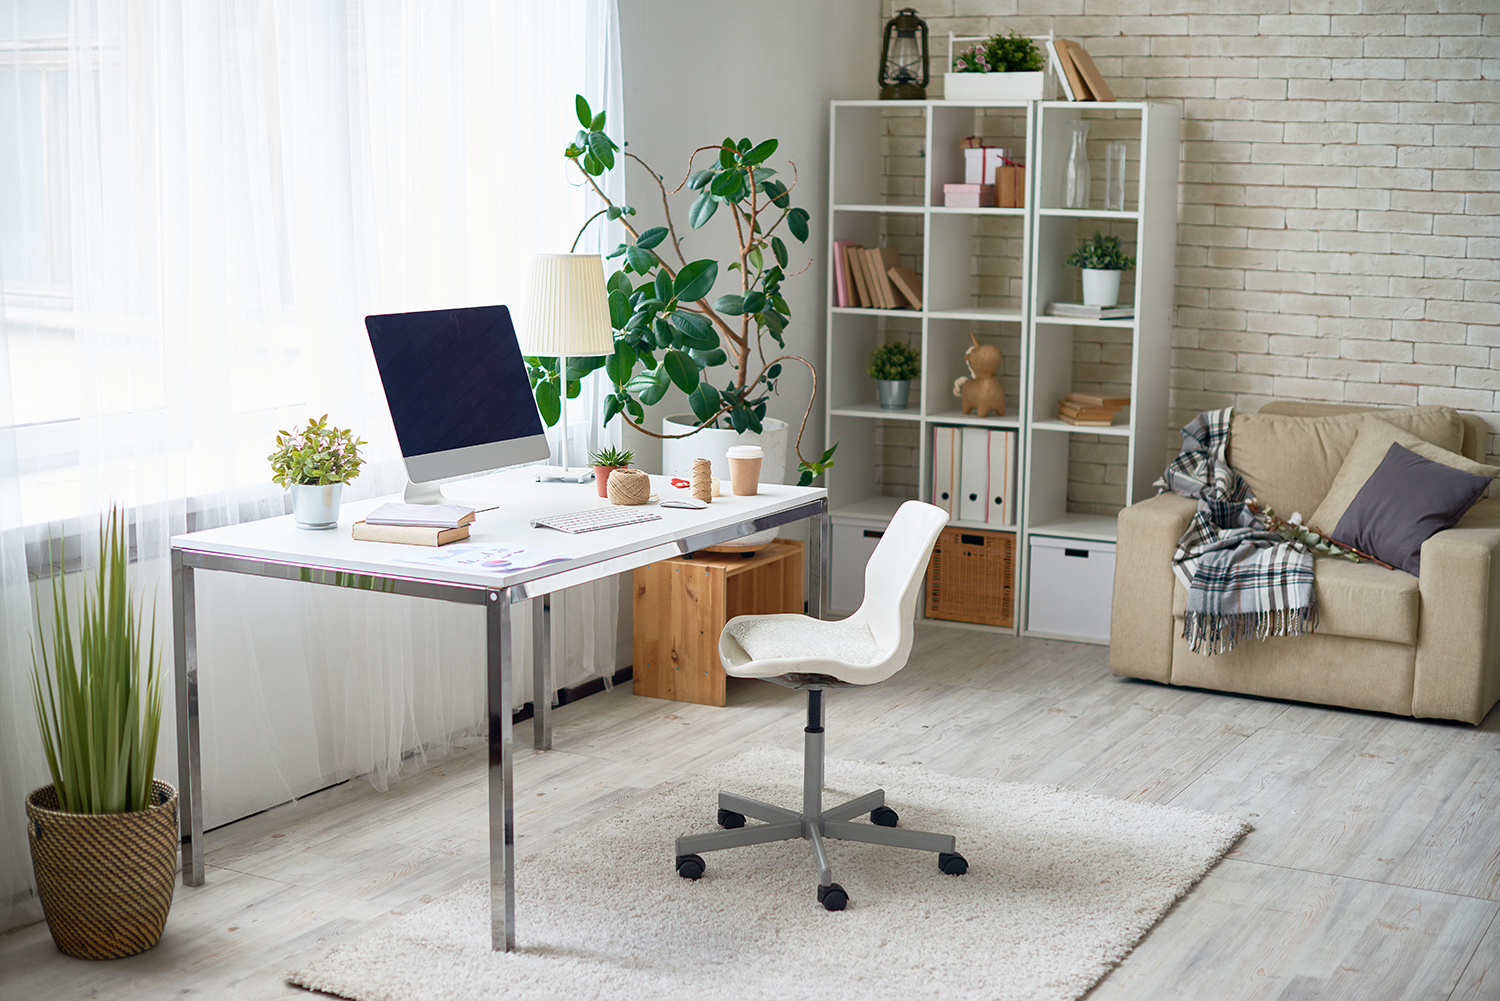 An image of modern home office with white chair and iMac